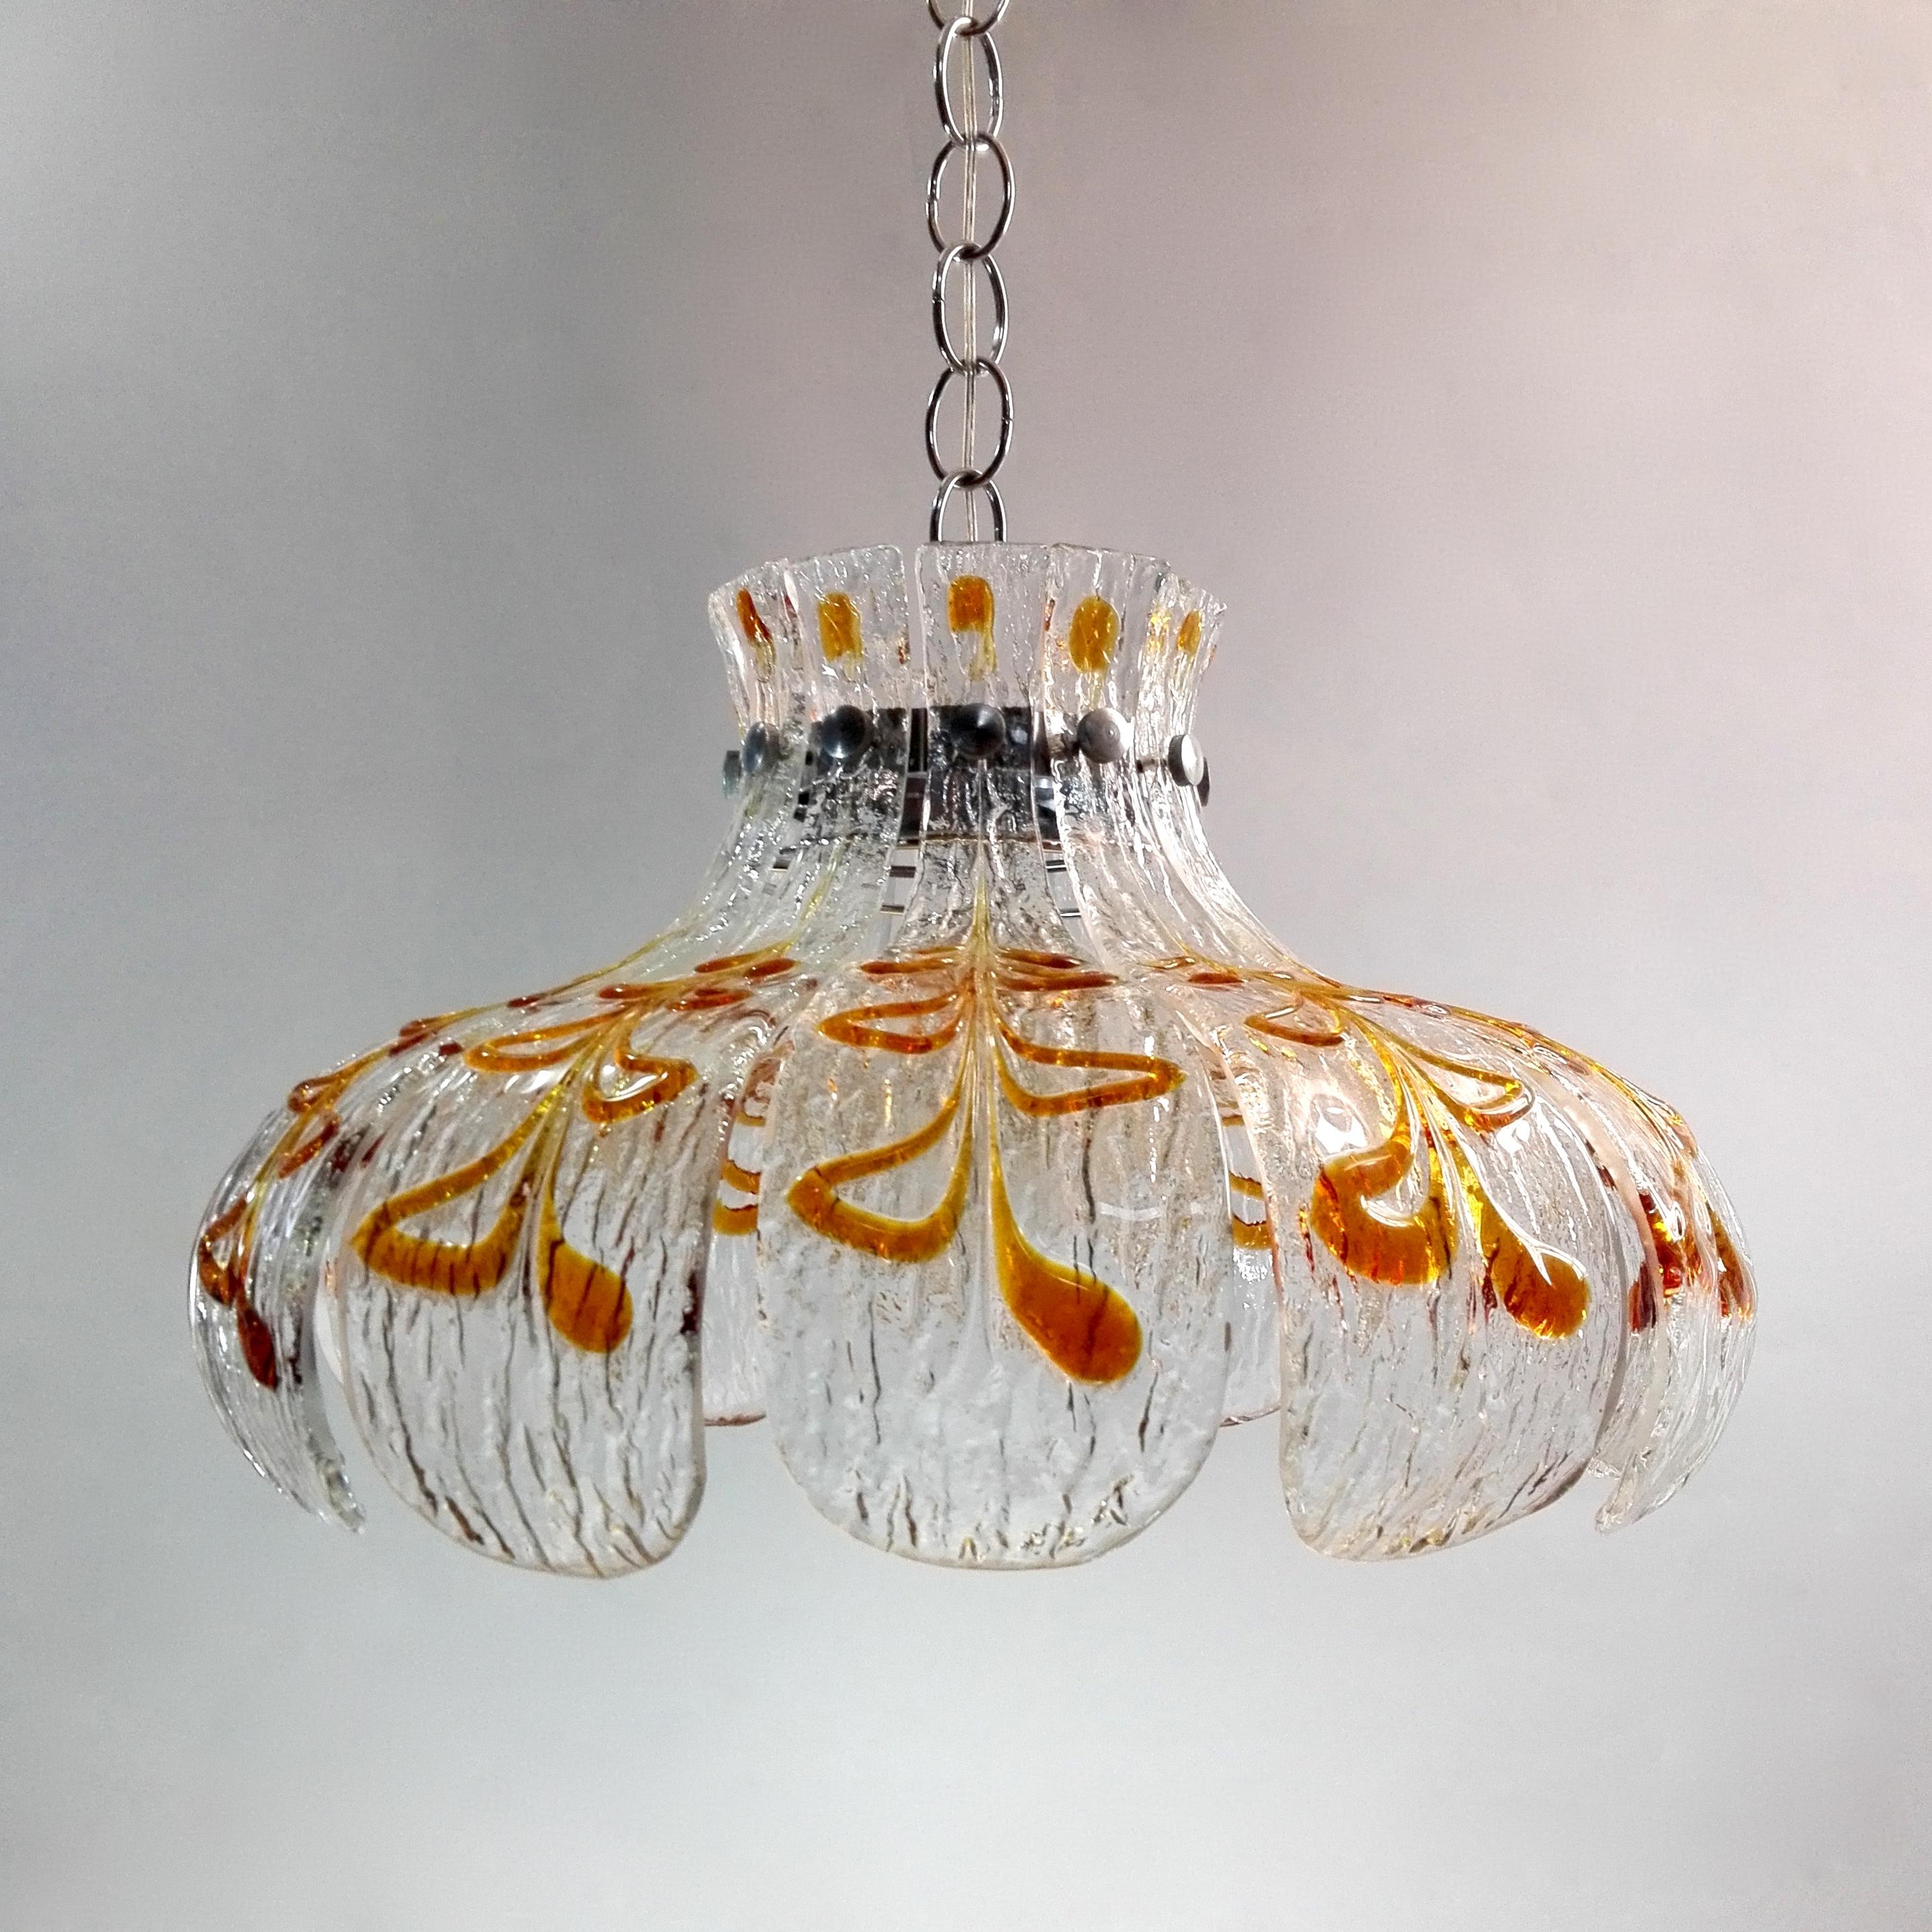 Charming large four-light hand-blown Murano art glass flower-shaped chandelier by Carlo Nason for Mazzega. Italy, late 1960s, early 1970s. 
This amazing 